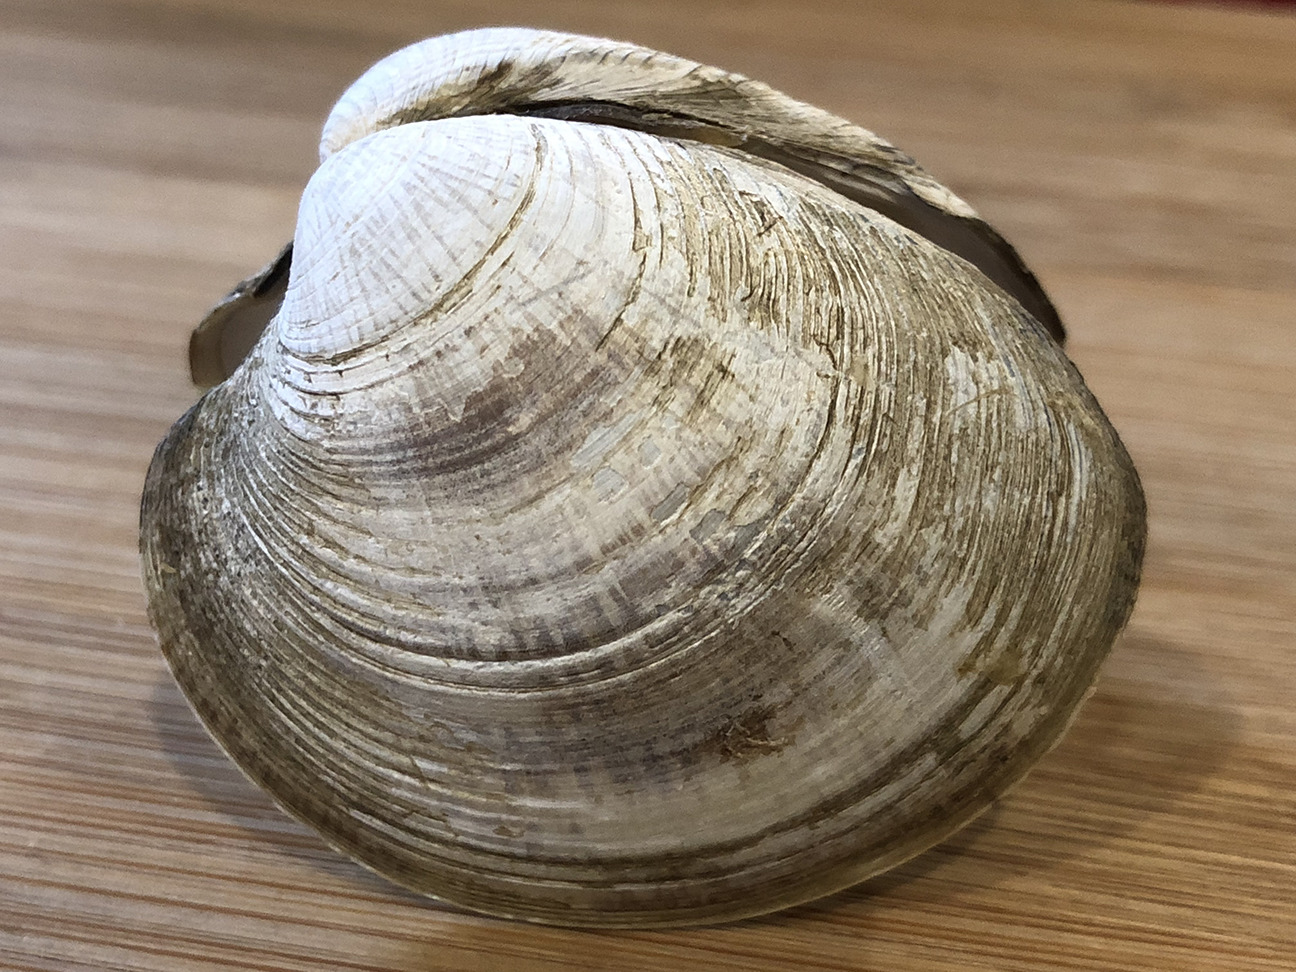 External features of the clam. Lateral view of the left side of a clam shell. Note the umbo (top left) and growth rings.